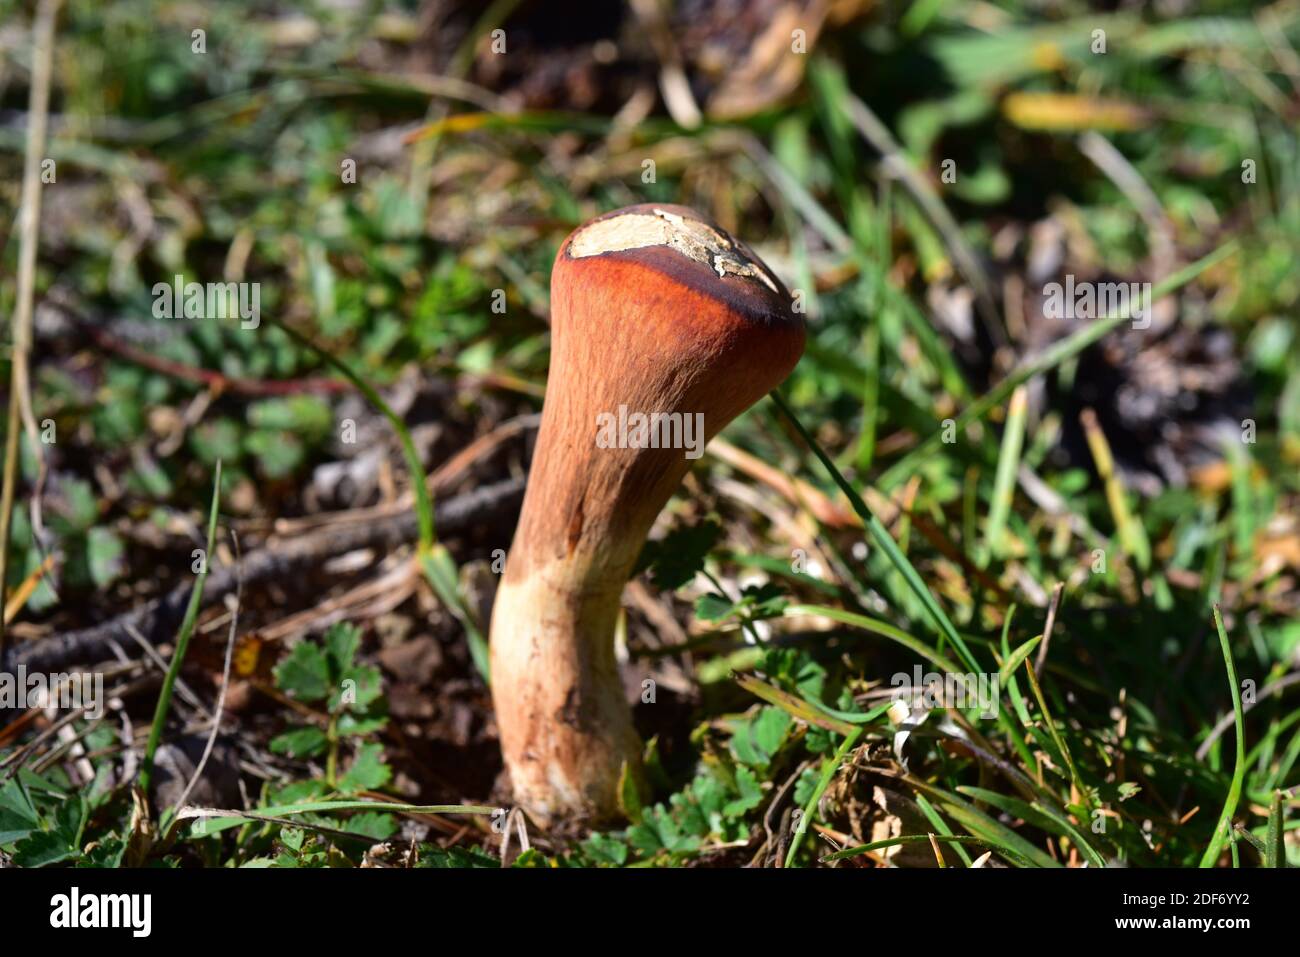 Club coral (Clavariadelphus truncatus) is an edible and medicinal mushroom. This photo was taken in a pine forest near Cantavieja, Teruel province, Stock Photo